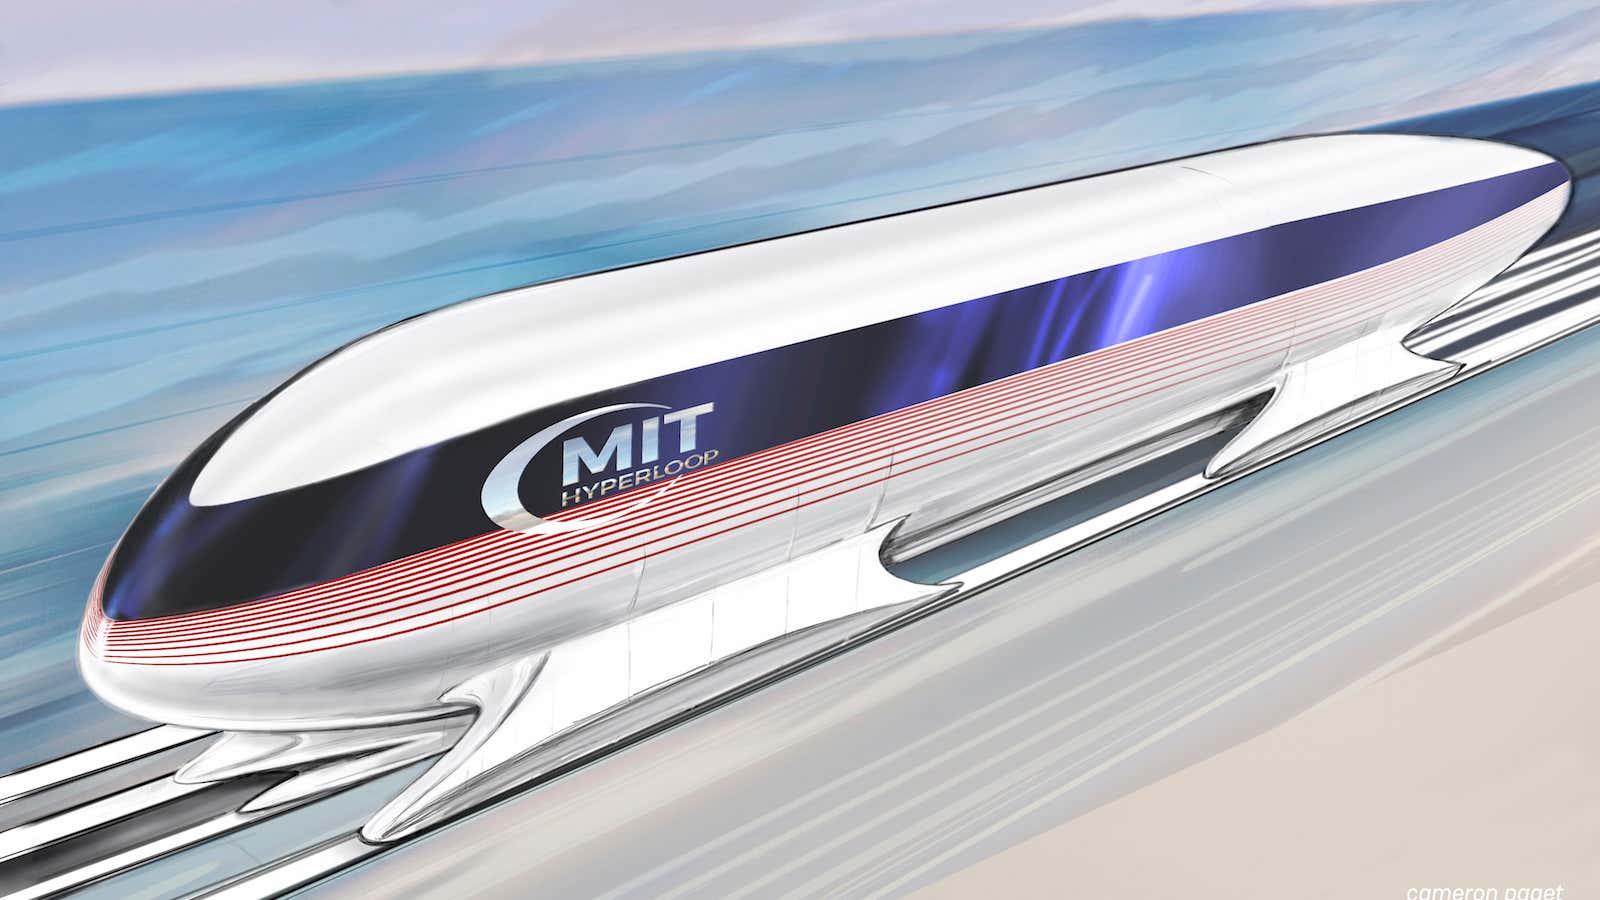 This is how MIT hopes its Hyperloop concept will look in the final version.